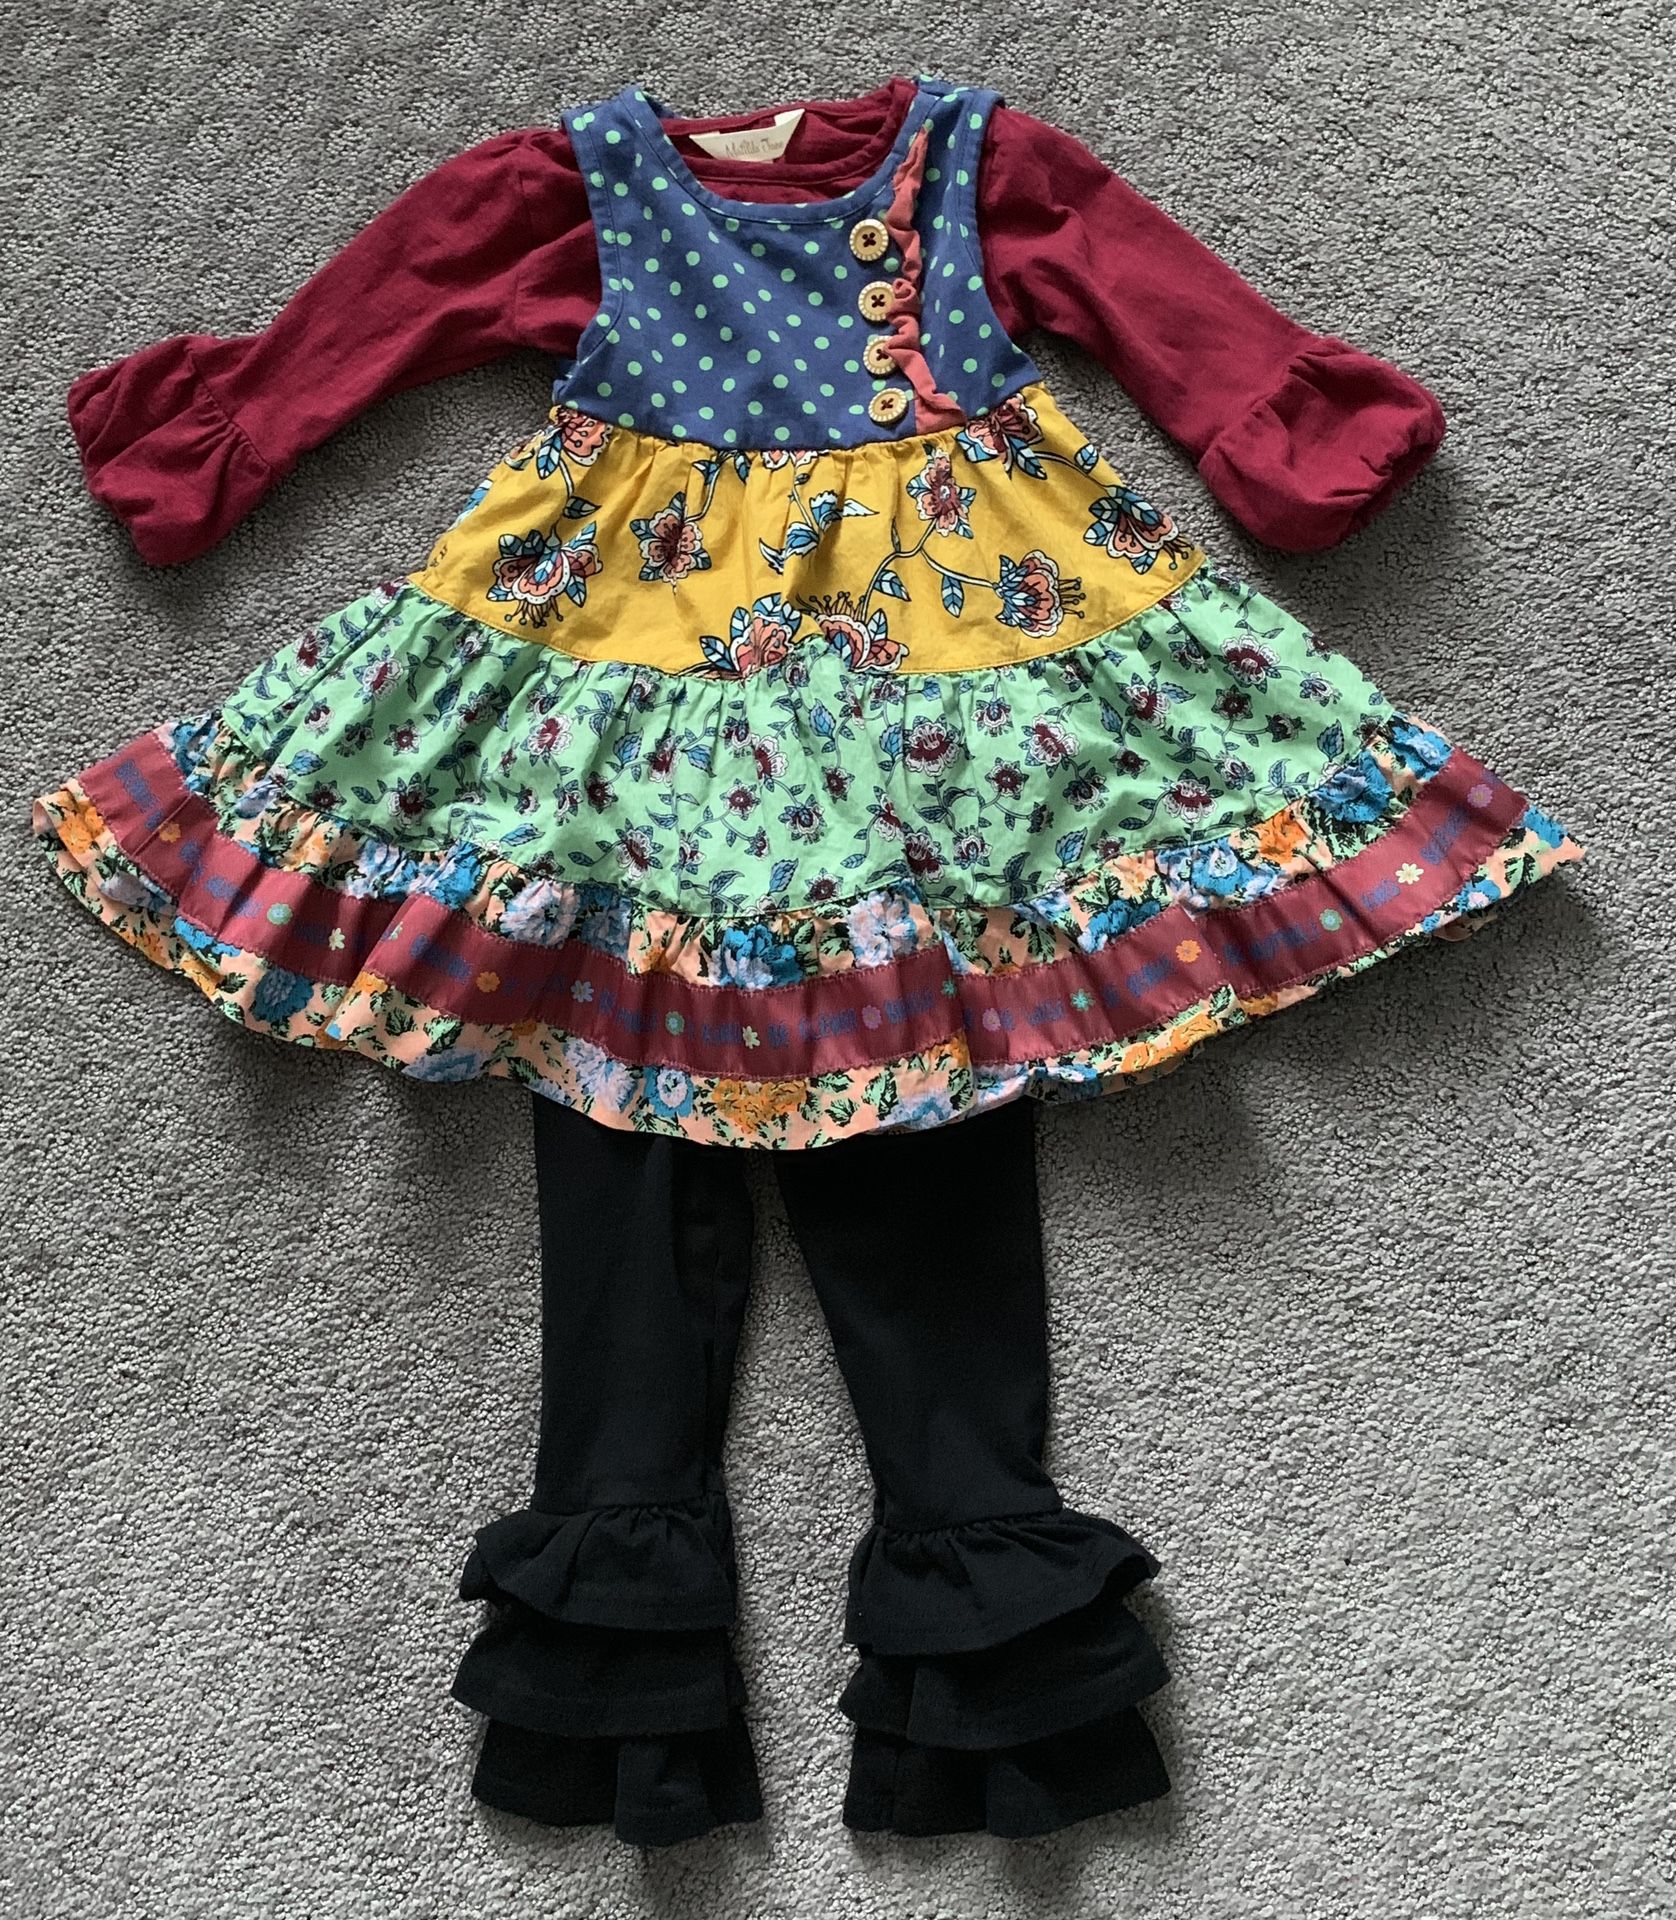 Toddler Girl Matilda Jane 3 Piece Outfit Size 2